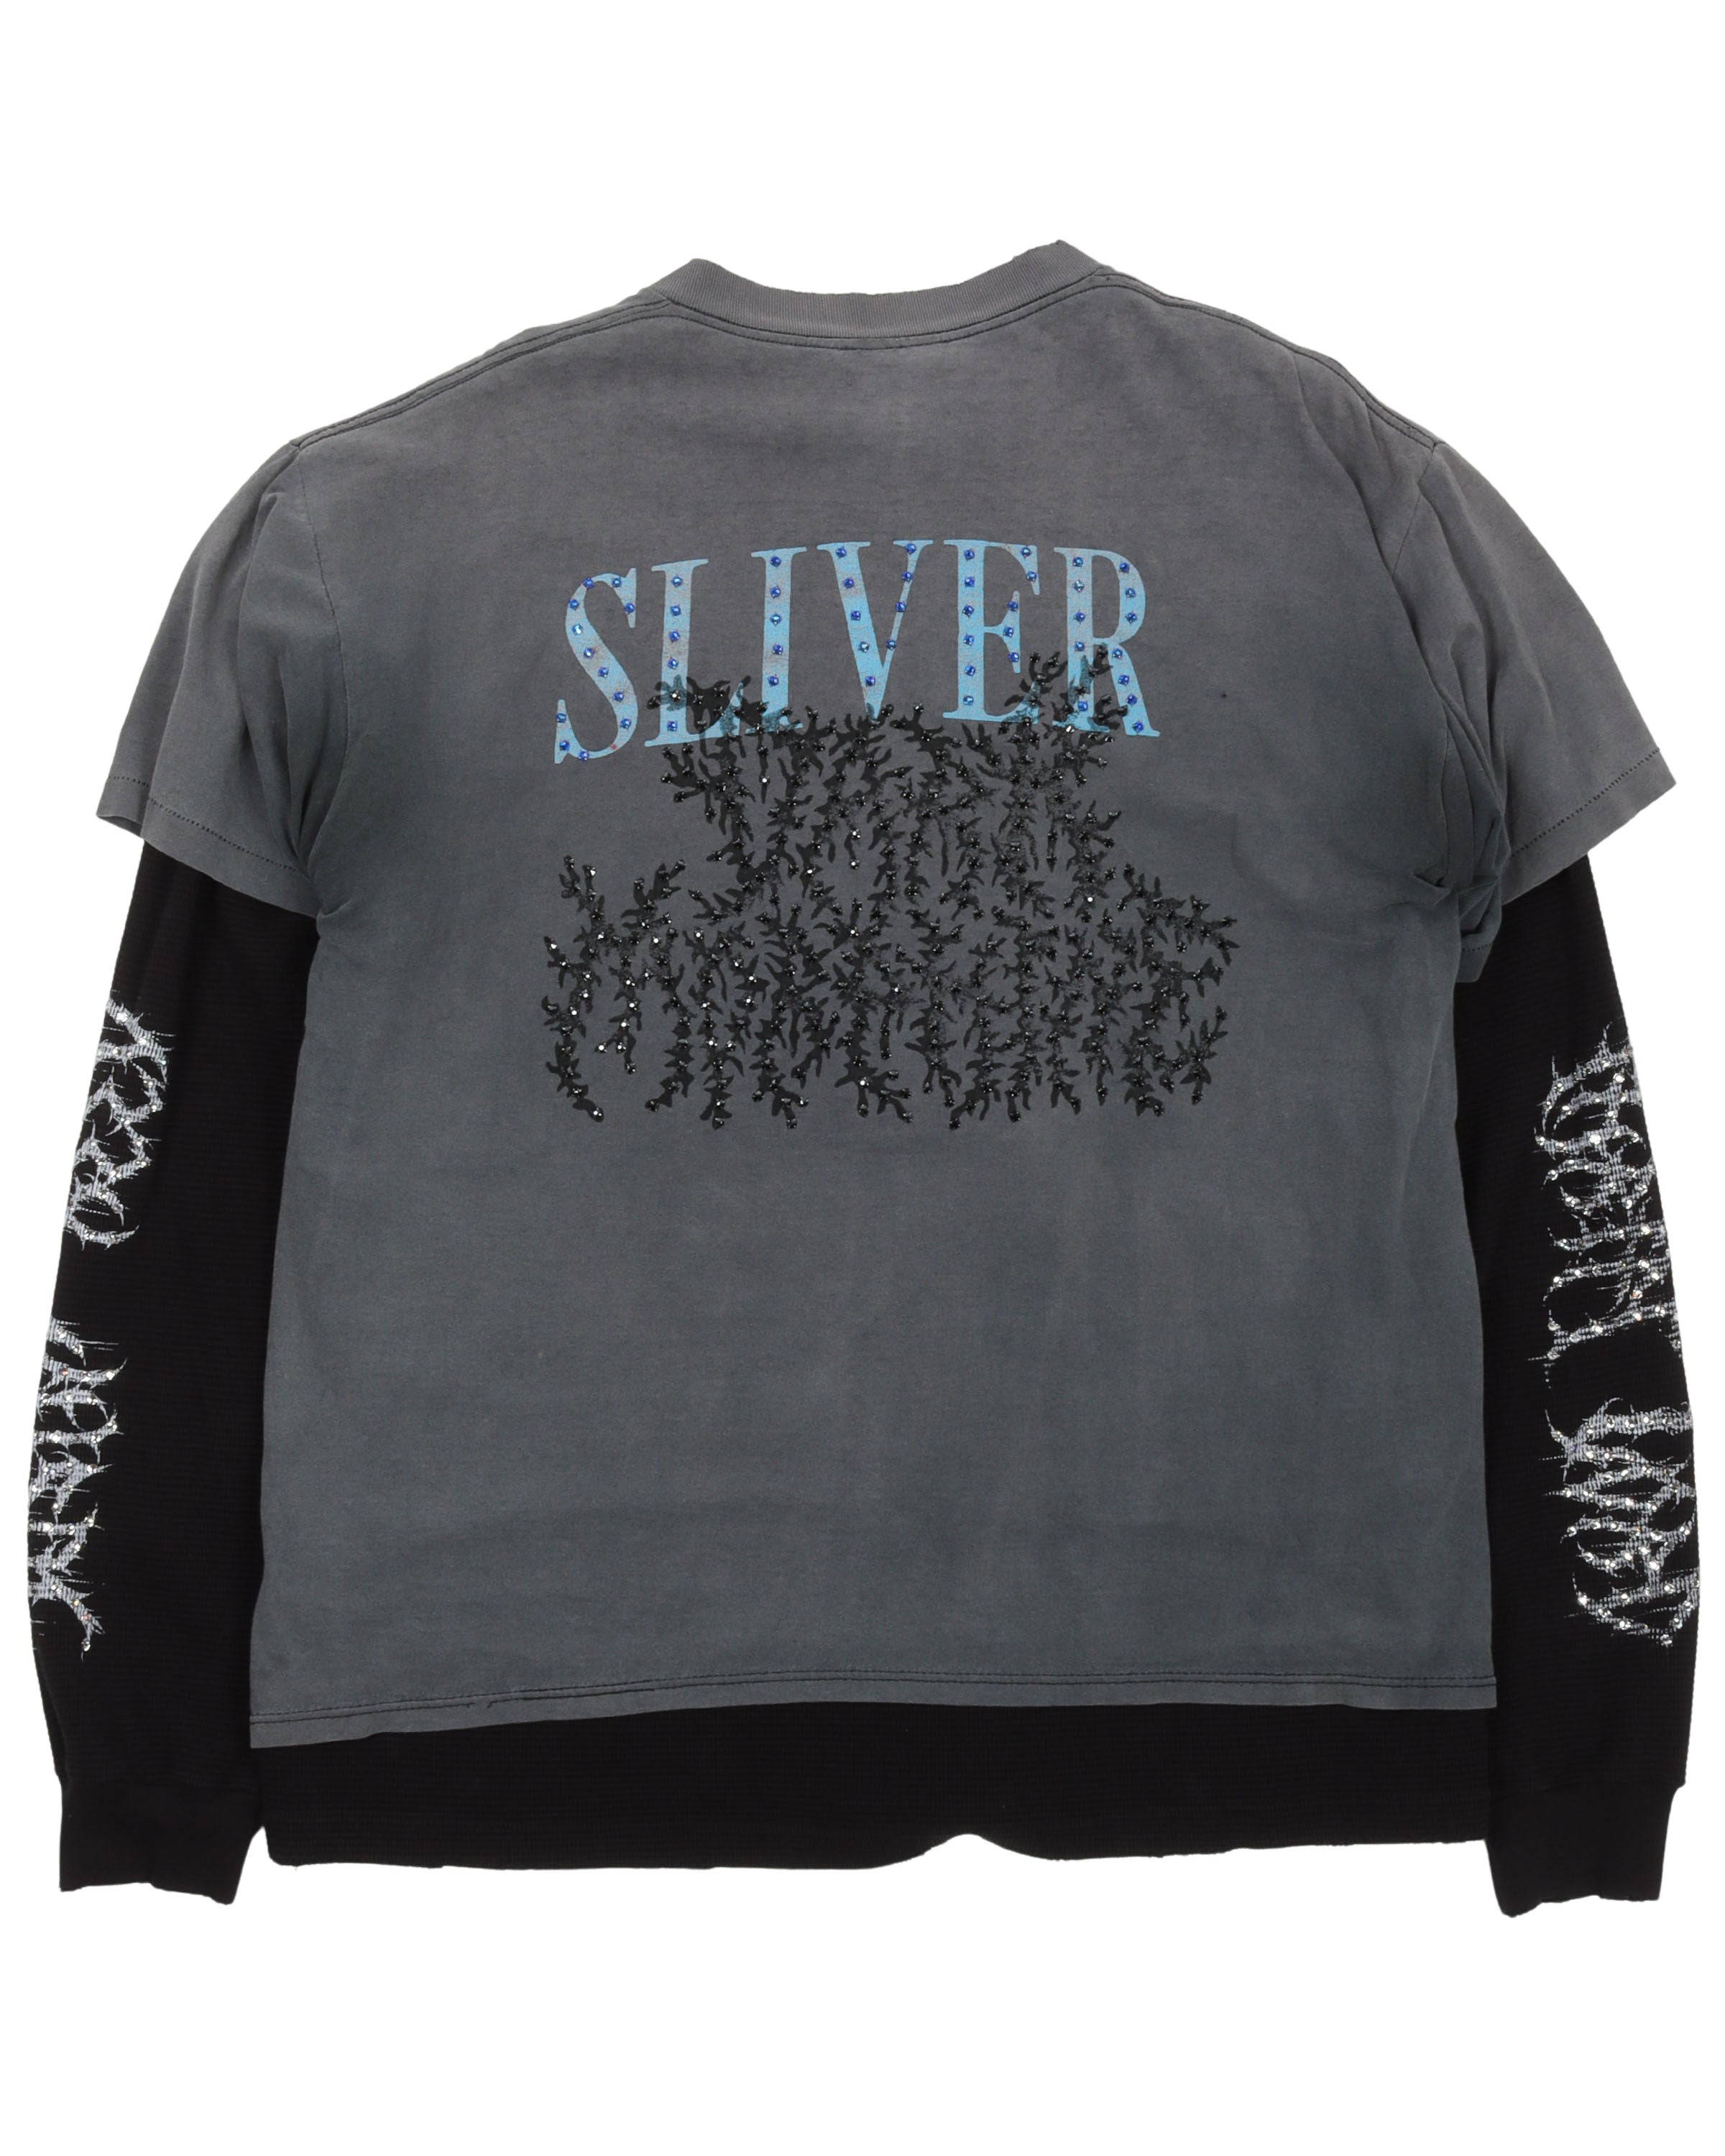 Justin Reed x Thrift Lord Sliver T-Shirt